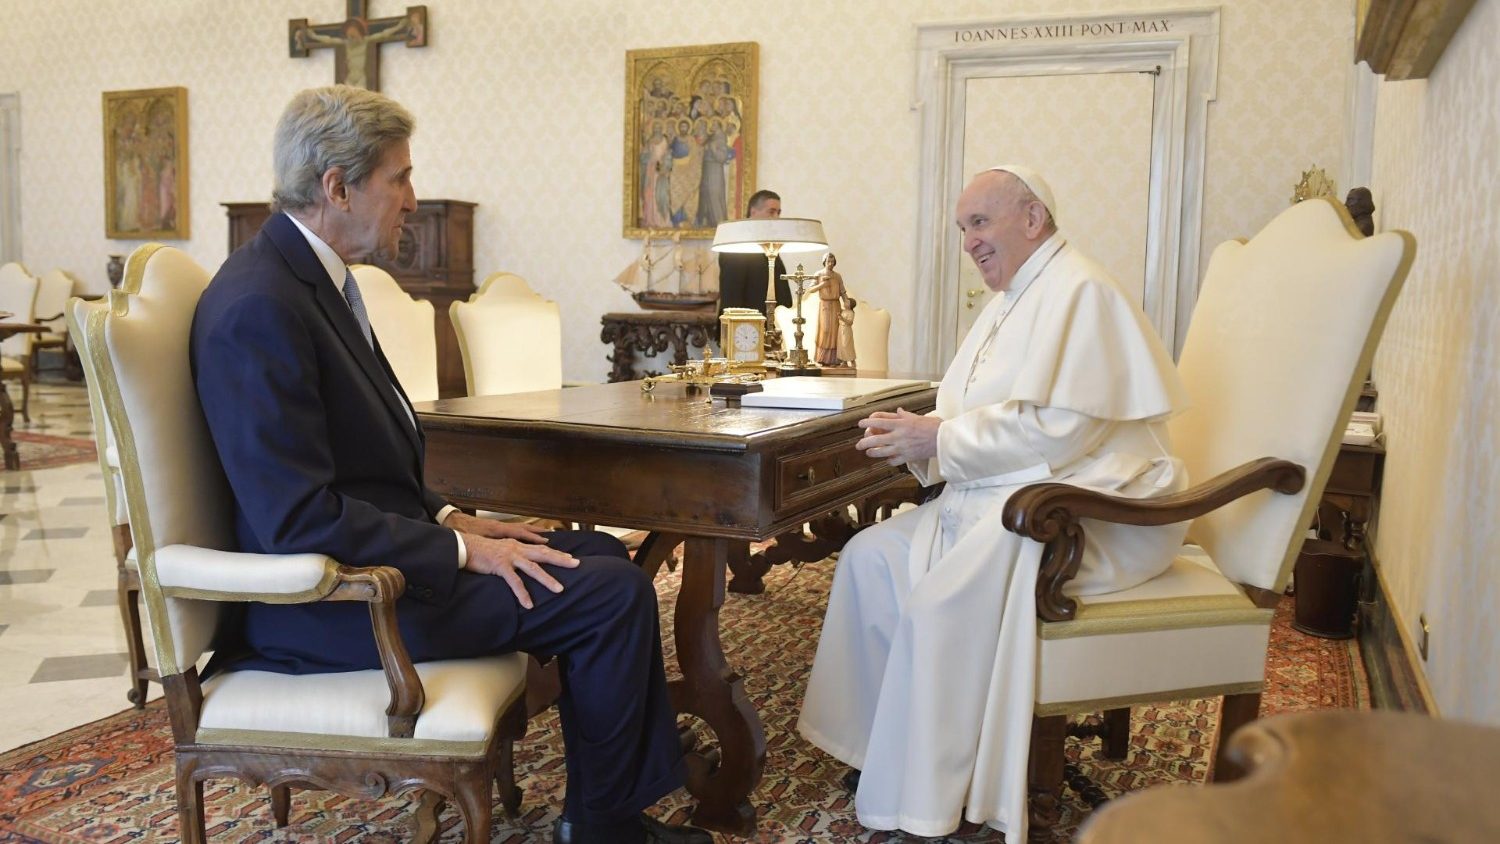 Kerry: The climate crisis The Pope’s vote is more important than ever